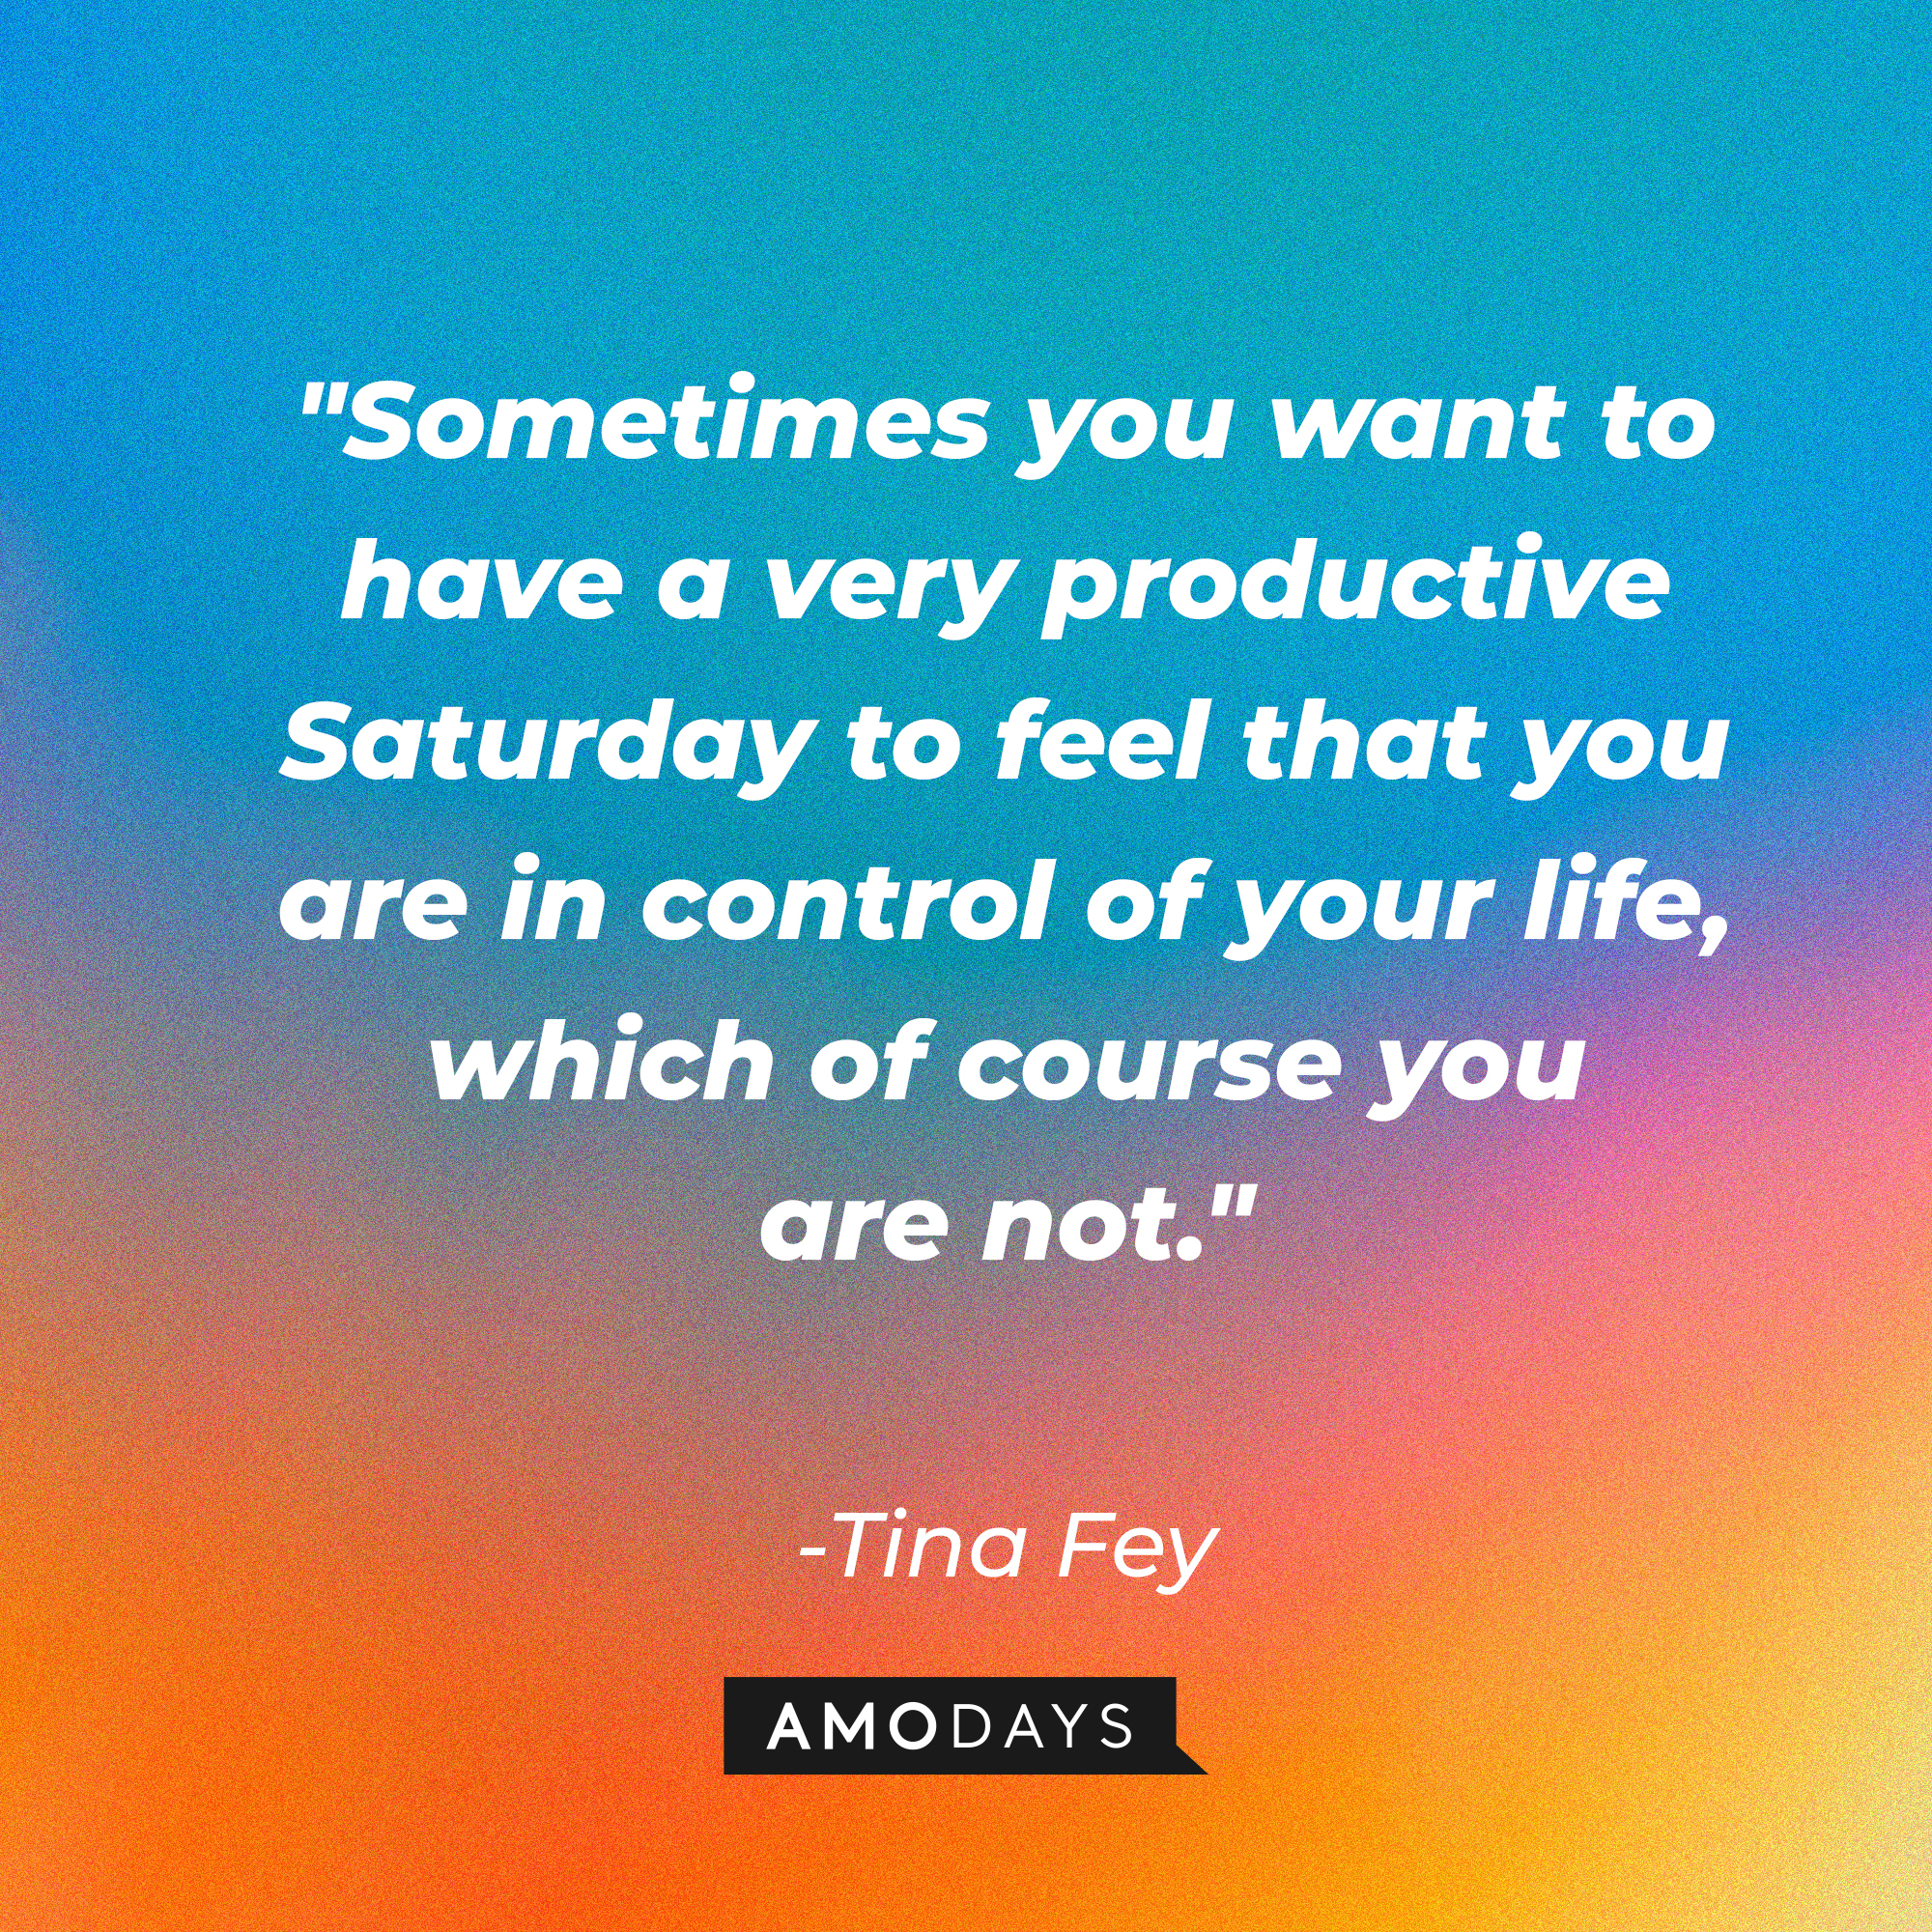 Tina Fey's quote: "Sometimes you want to have a very productive Saturday to feel that you are in control of your life, which of course you are not." | Source: AmoDays